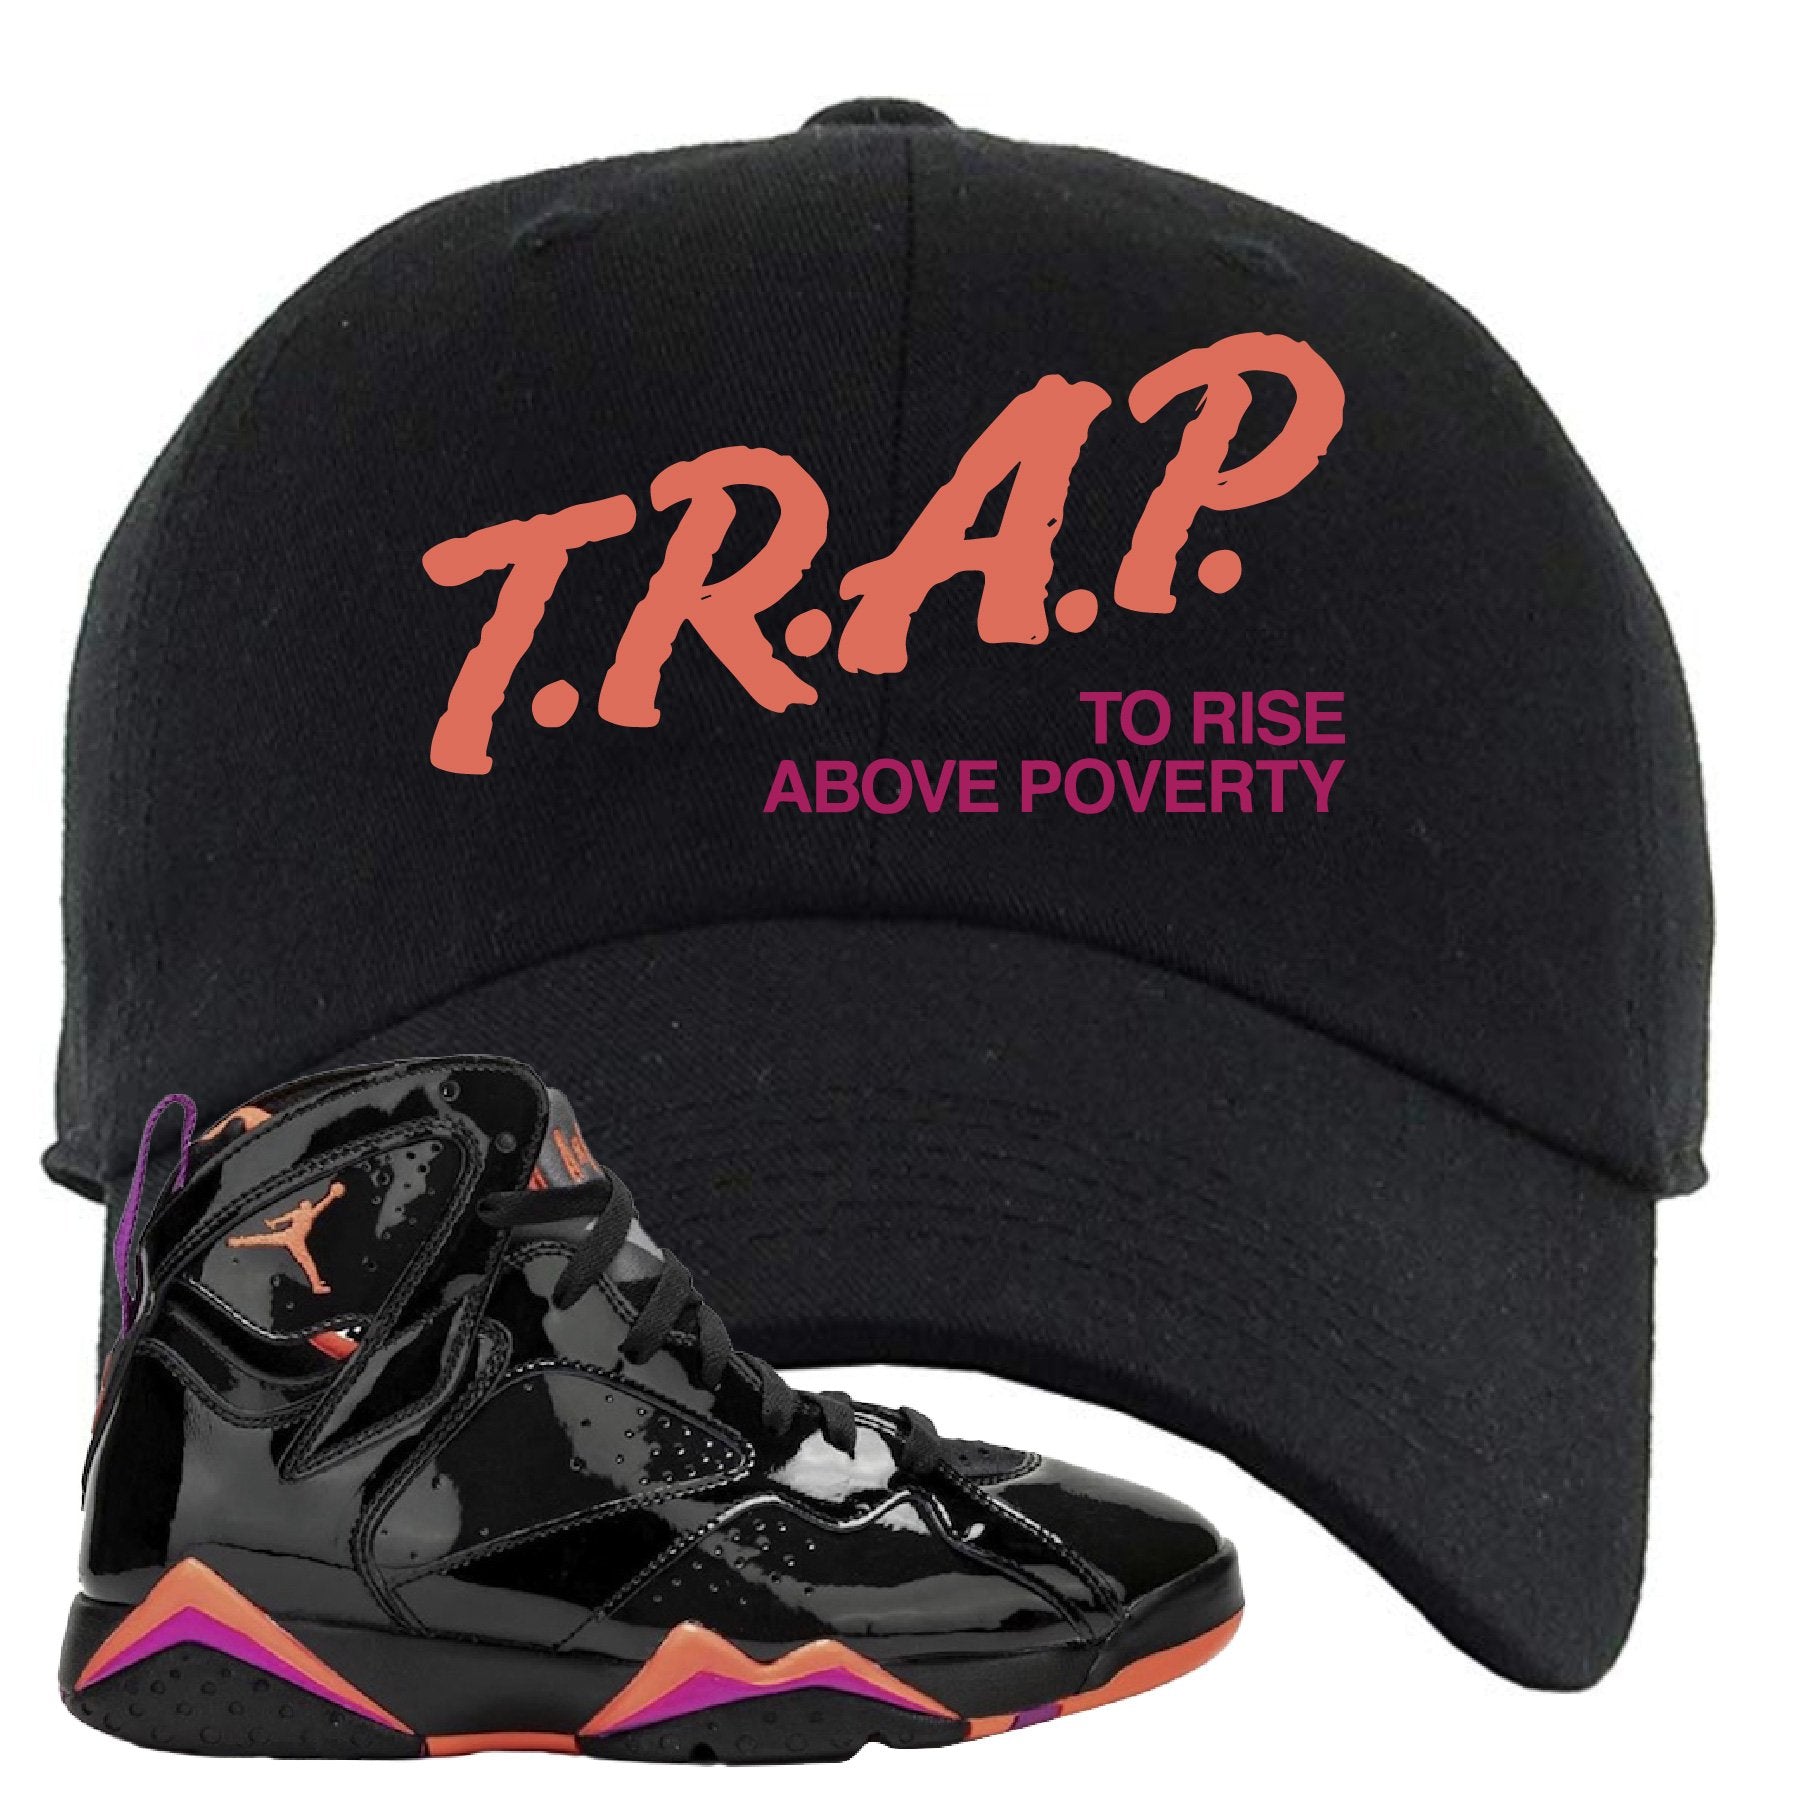 Jordan 7 WMNS Black Patent Leather Trap To Rise Above Poverty Black Sneaker Hook Up Dad Hat